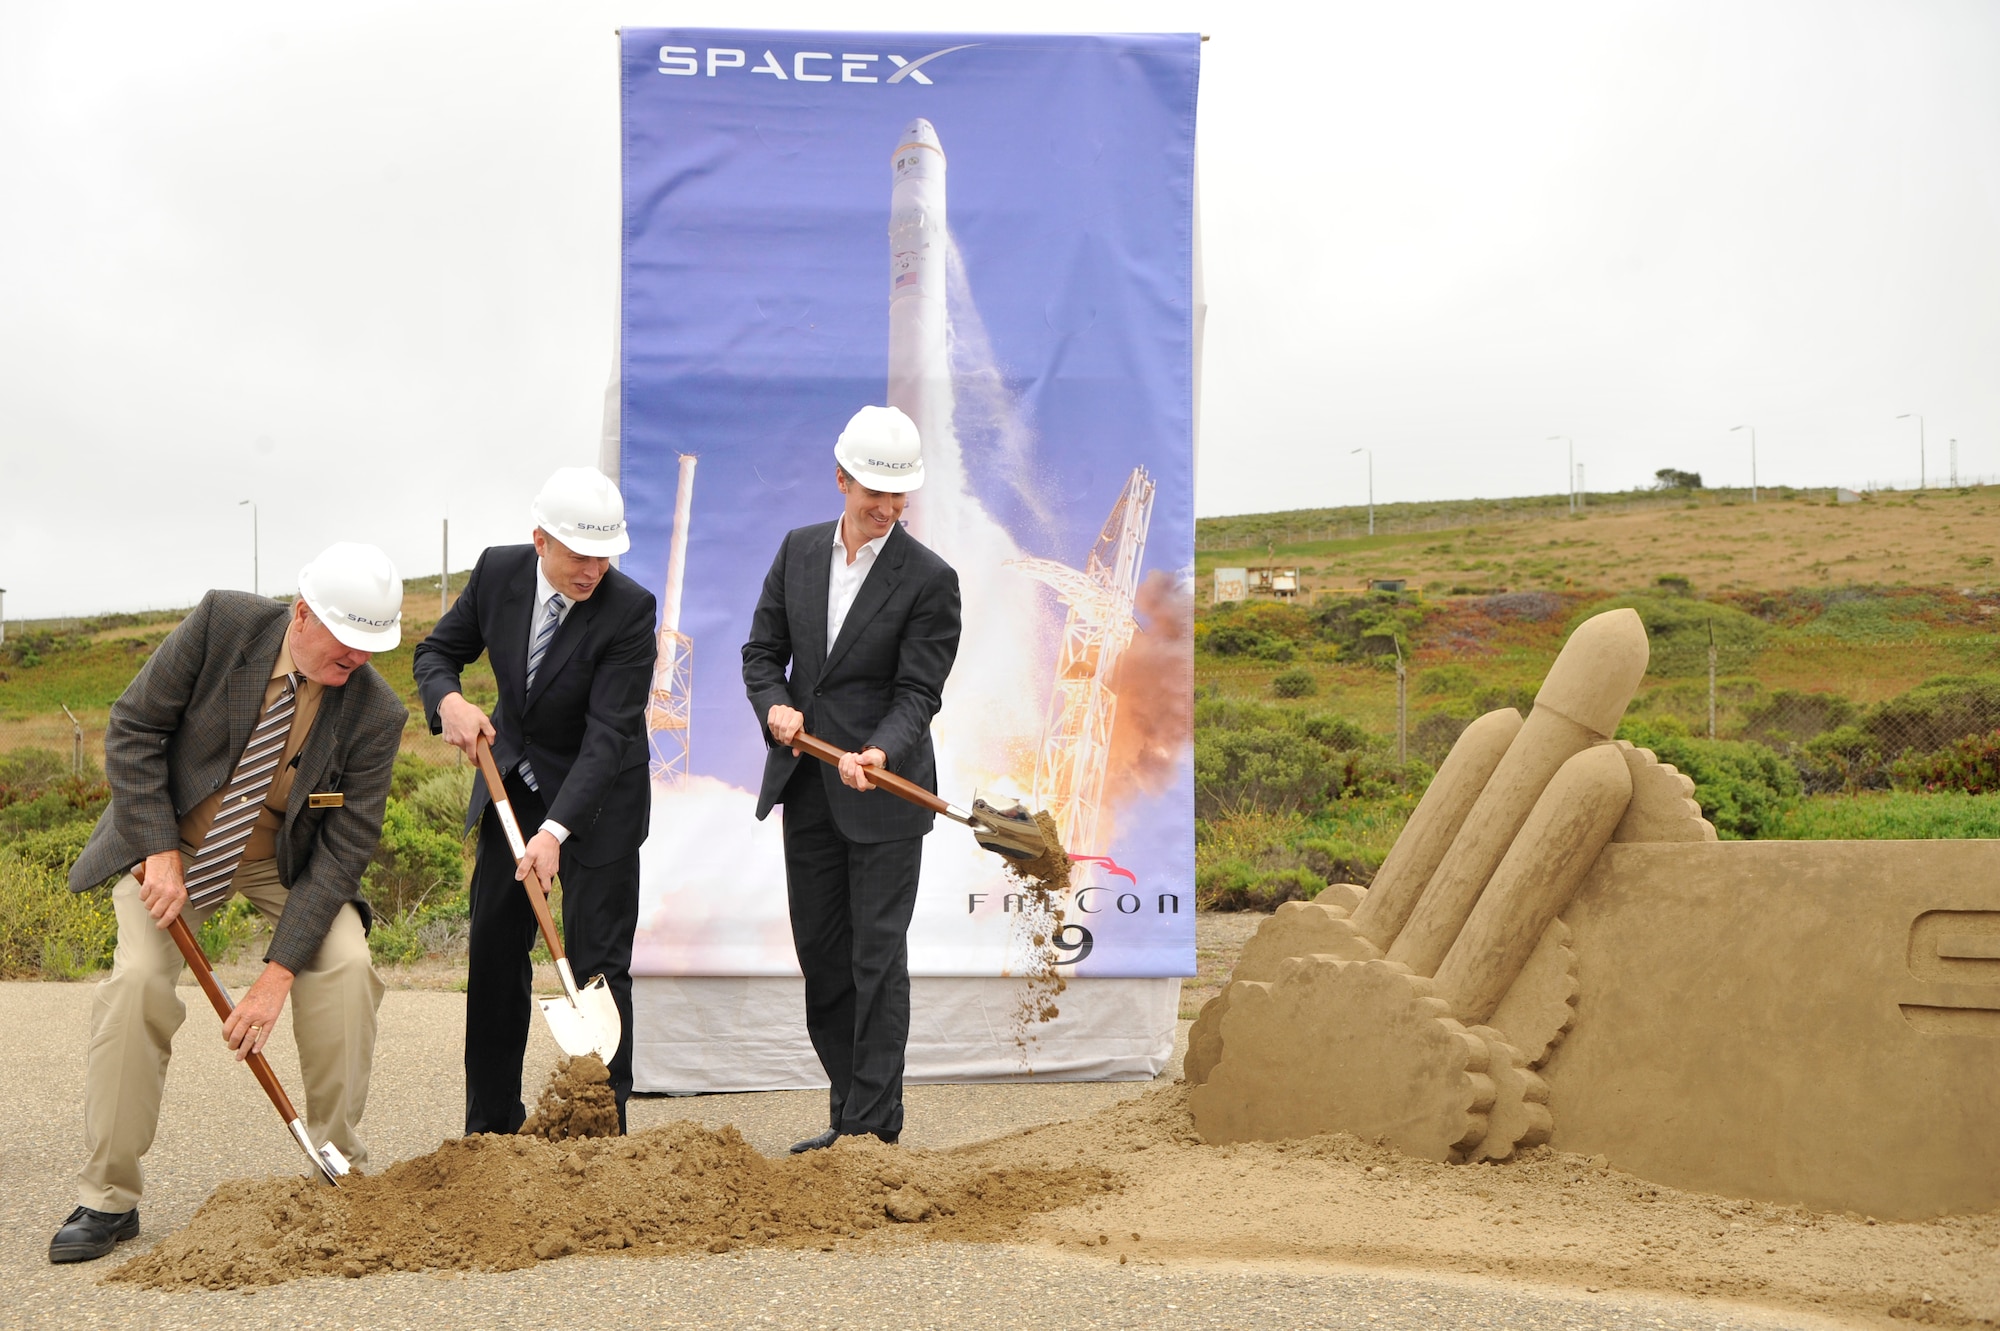 VANDENBERG AIR FORCE BASE, Calif. -- Lompoc Mayor John Linn, Elon Musk, the founder and chief executive officer of SpaceX, and California Lt. Govenor Gavin Newsom, shovel sand during the ground breaking ceremony at Space Launch Complex 4 East here Wednesday, July 14, 2011.  SpaceX has plans to launch their Falcon Heavy from Vandenberg in 2013.  (U.S. Air Force photo/Staff Sgt. Andrew Satran) 

 